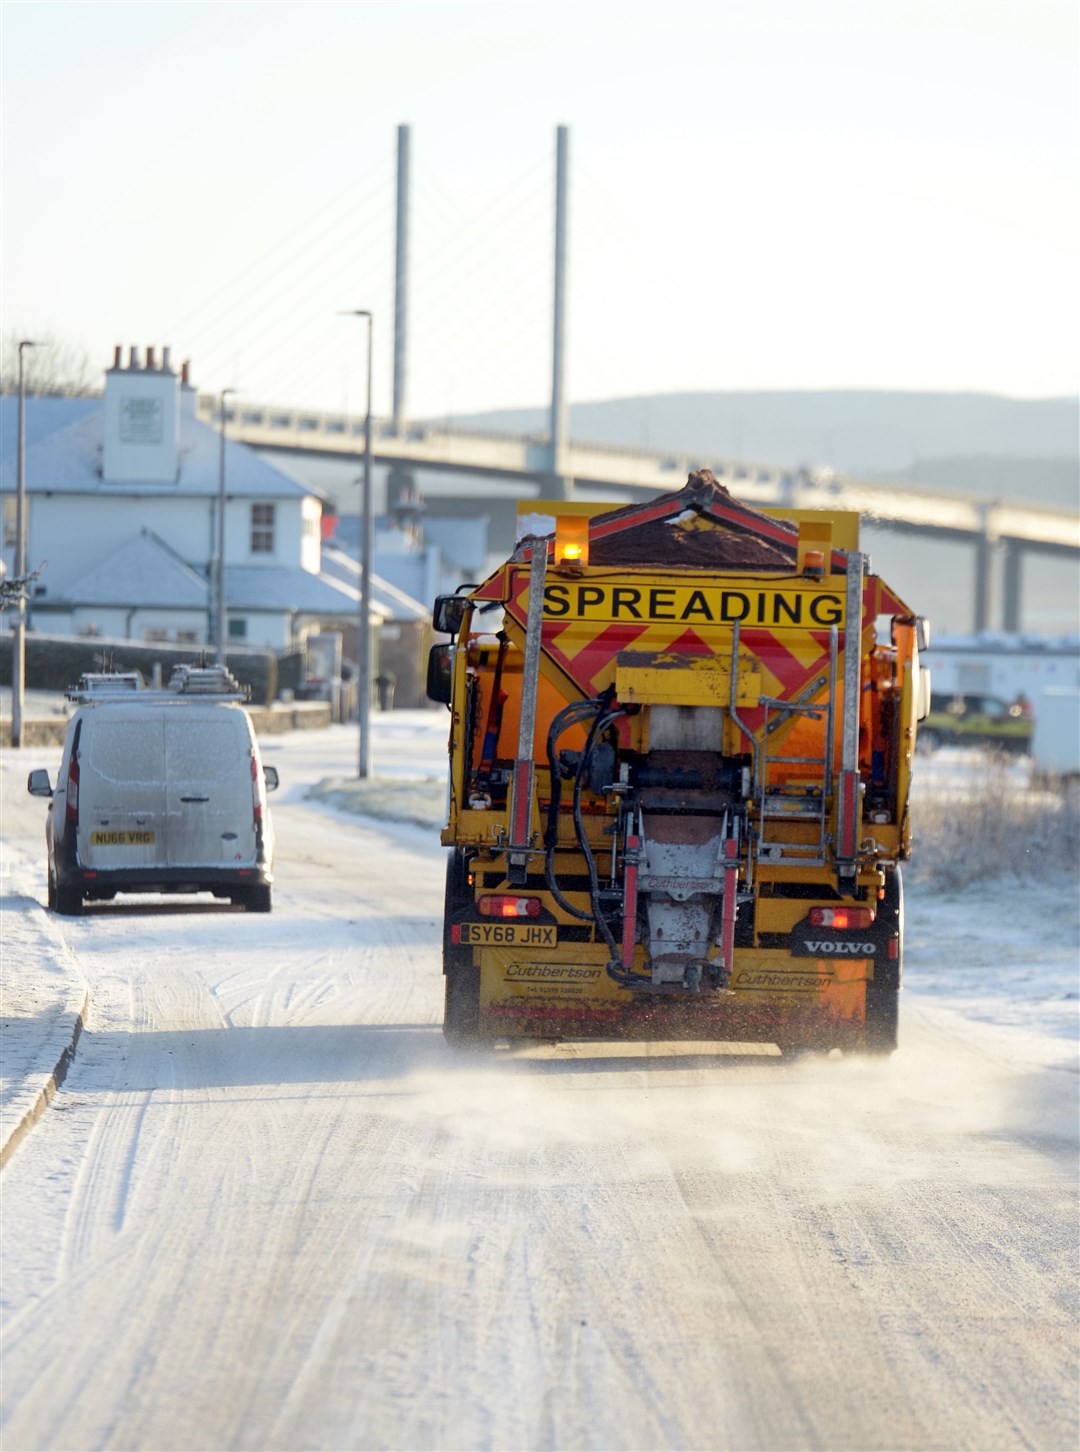 A gritter in action near Inverness.